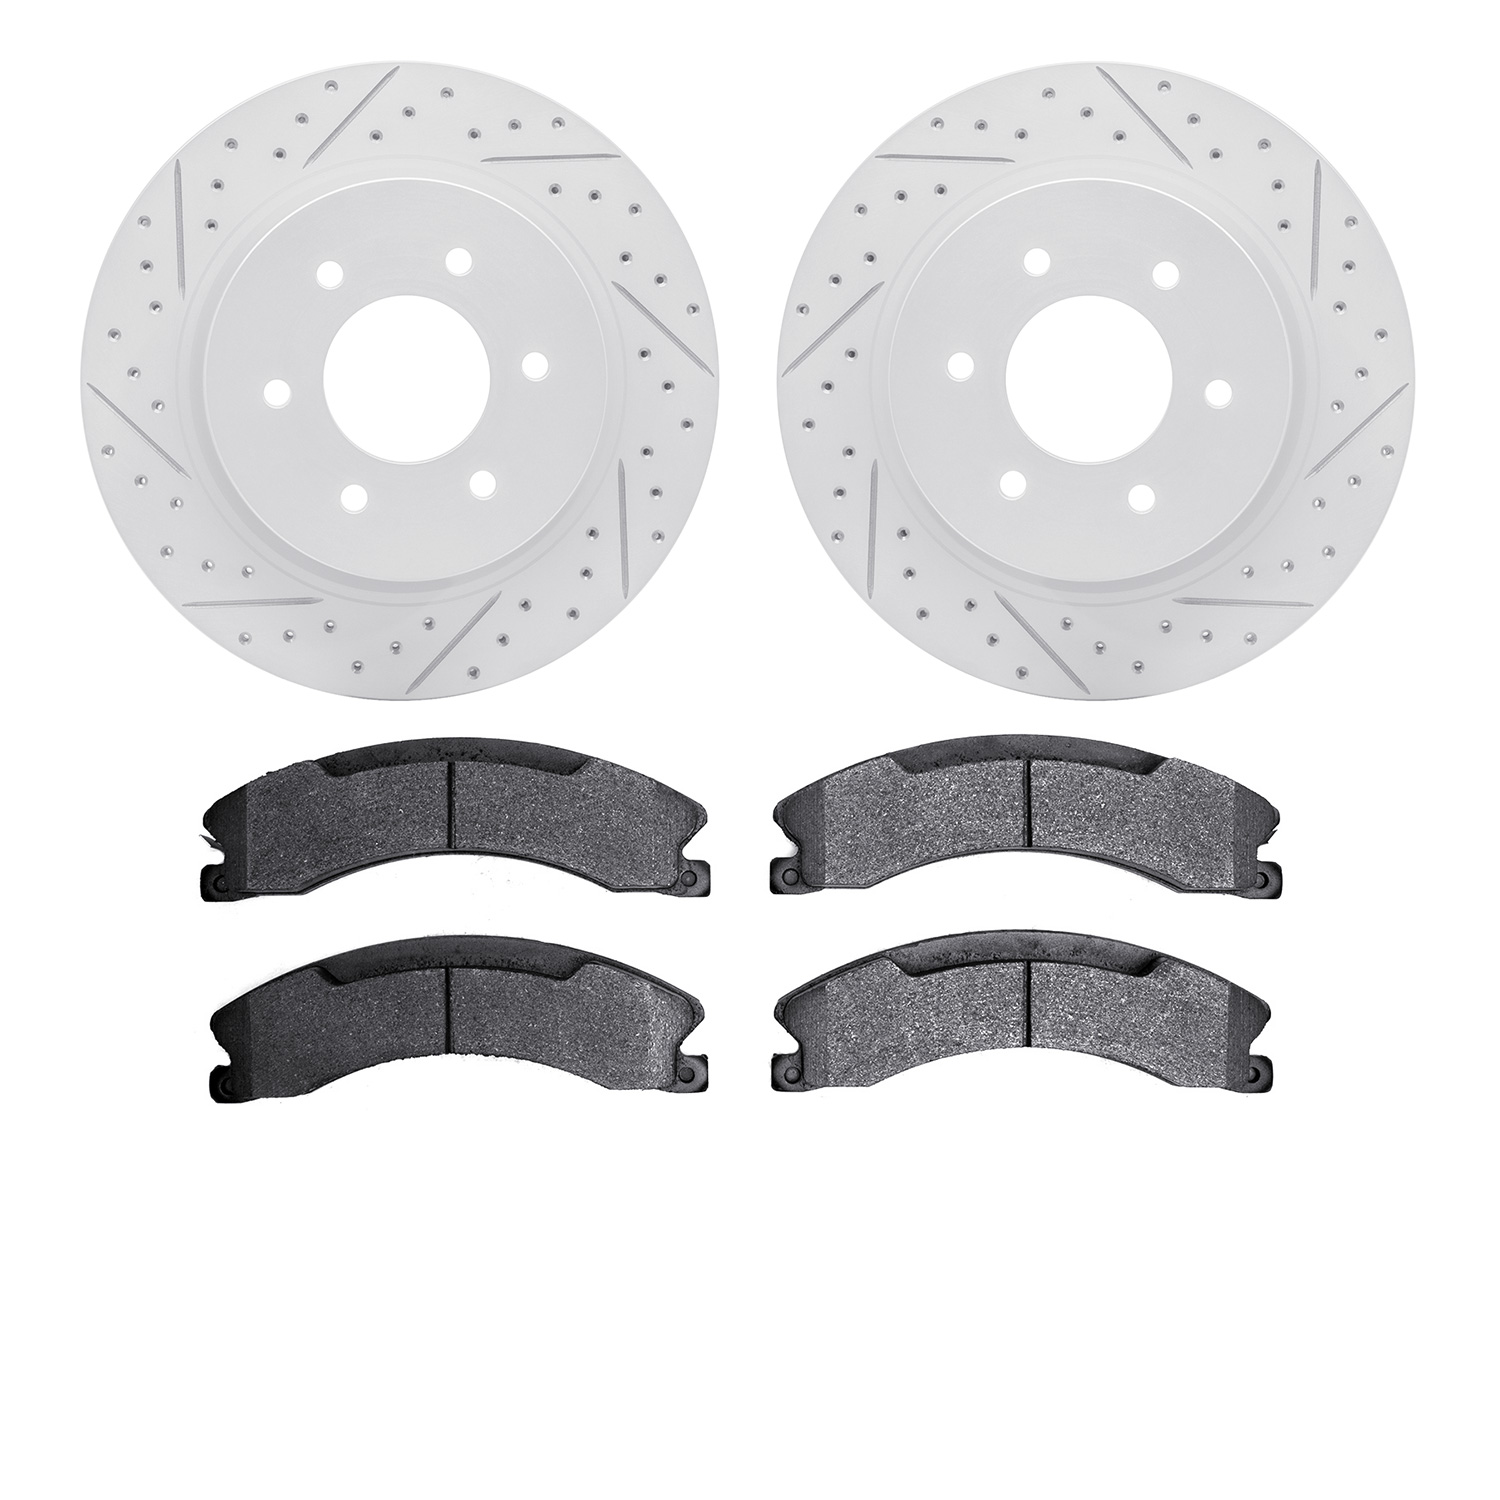 2202-67005 Geoperformance Drilled/Slotted Rotors w/Heavy-Duty Pads Kit, Fits Select Infiniti/Nissan, Position: Front